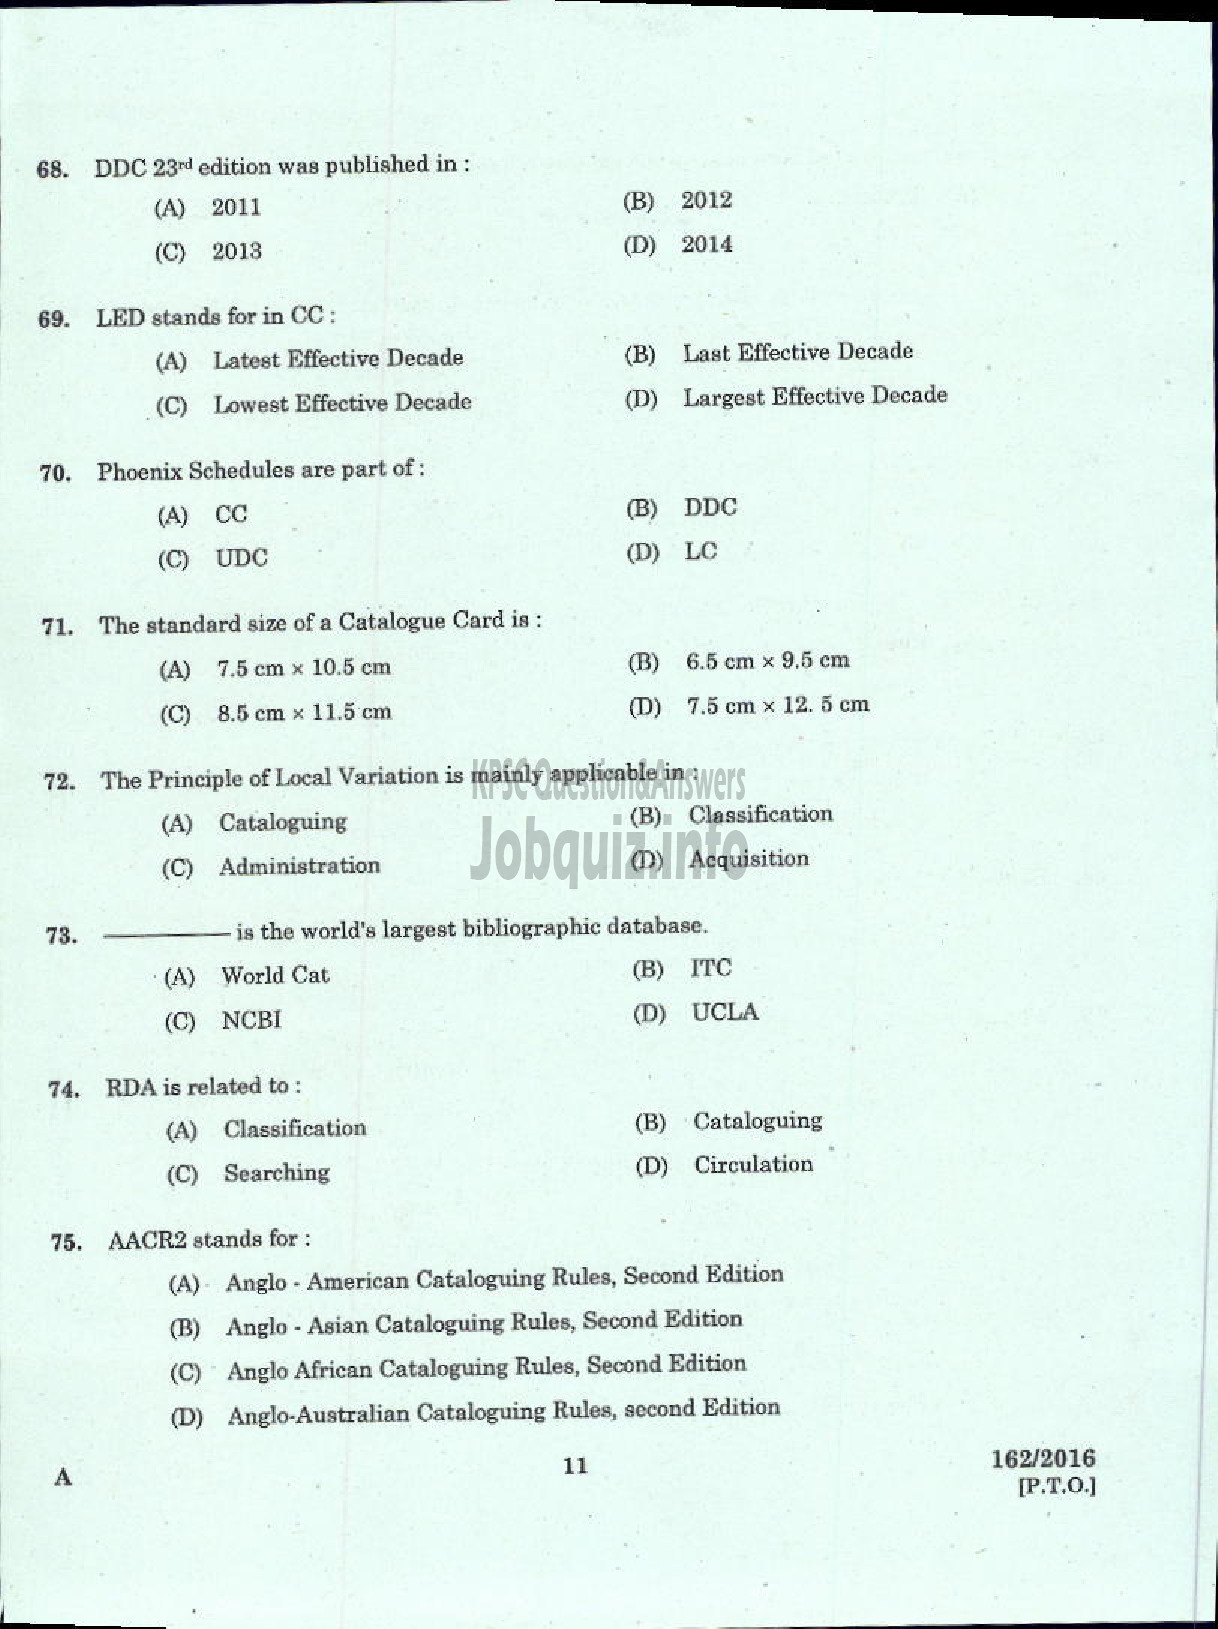 Kerala PSC Question Paper - LIBRARIAN GR IV KERALA COMMON POOL LIBRARY-9